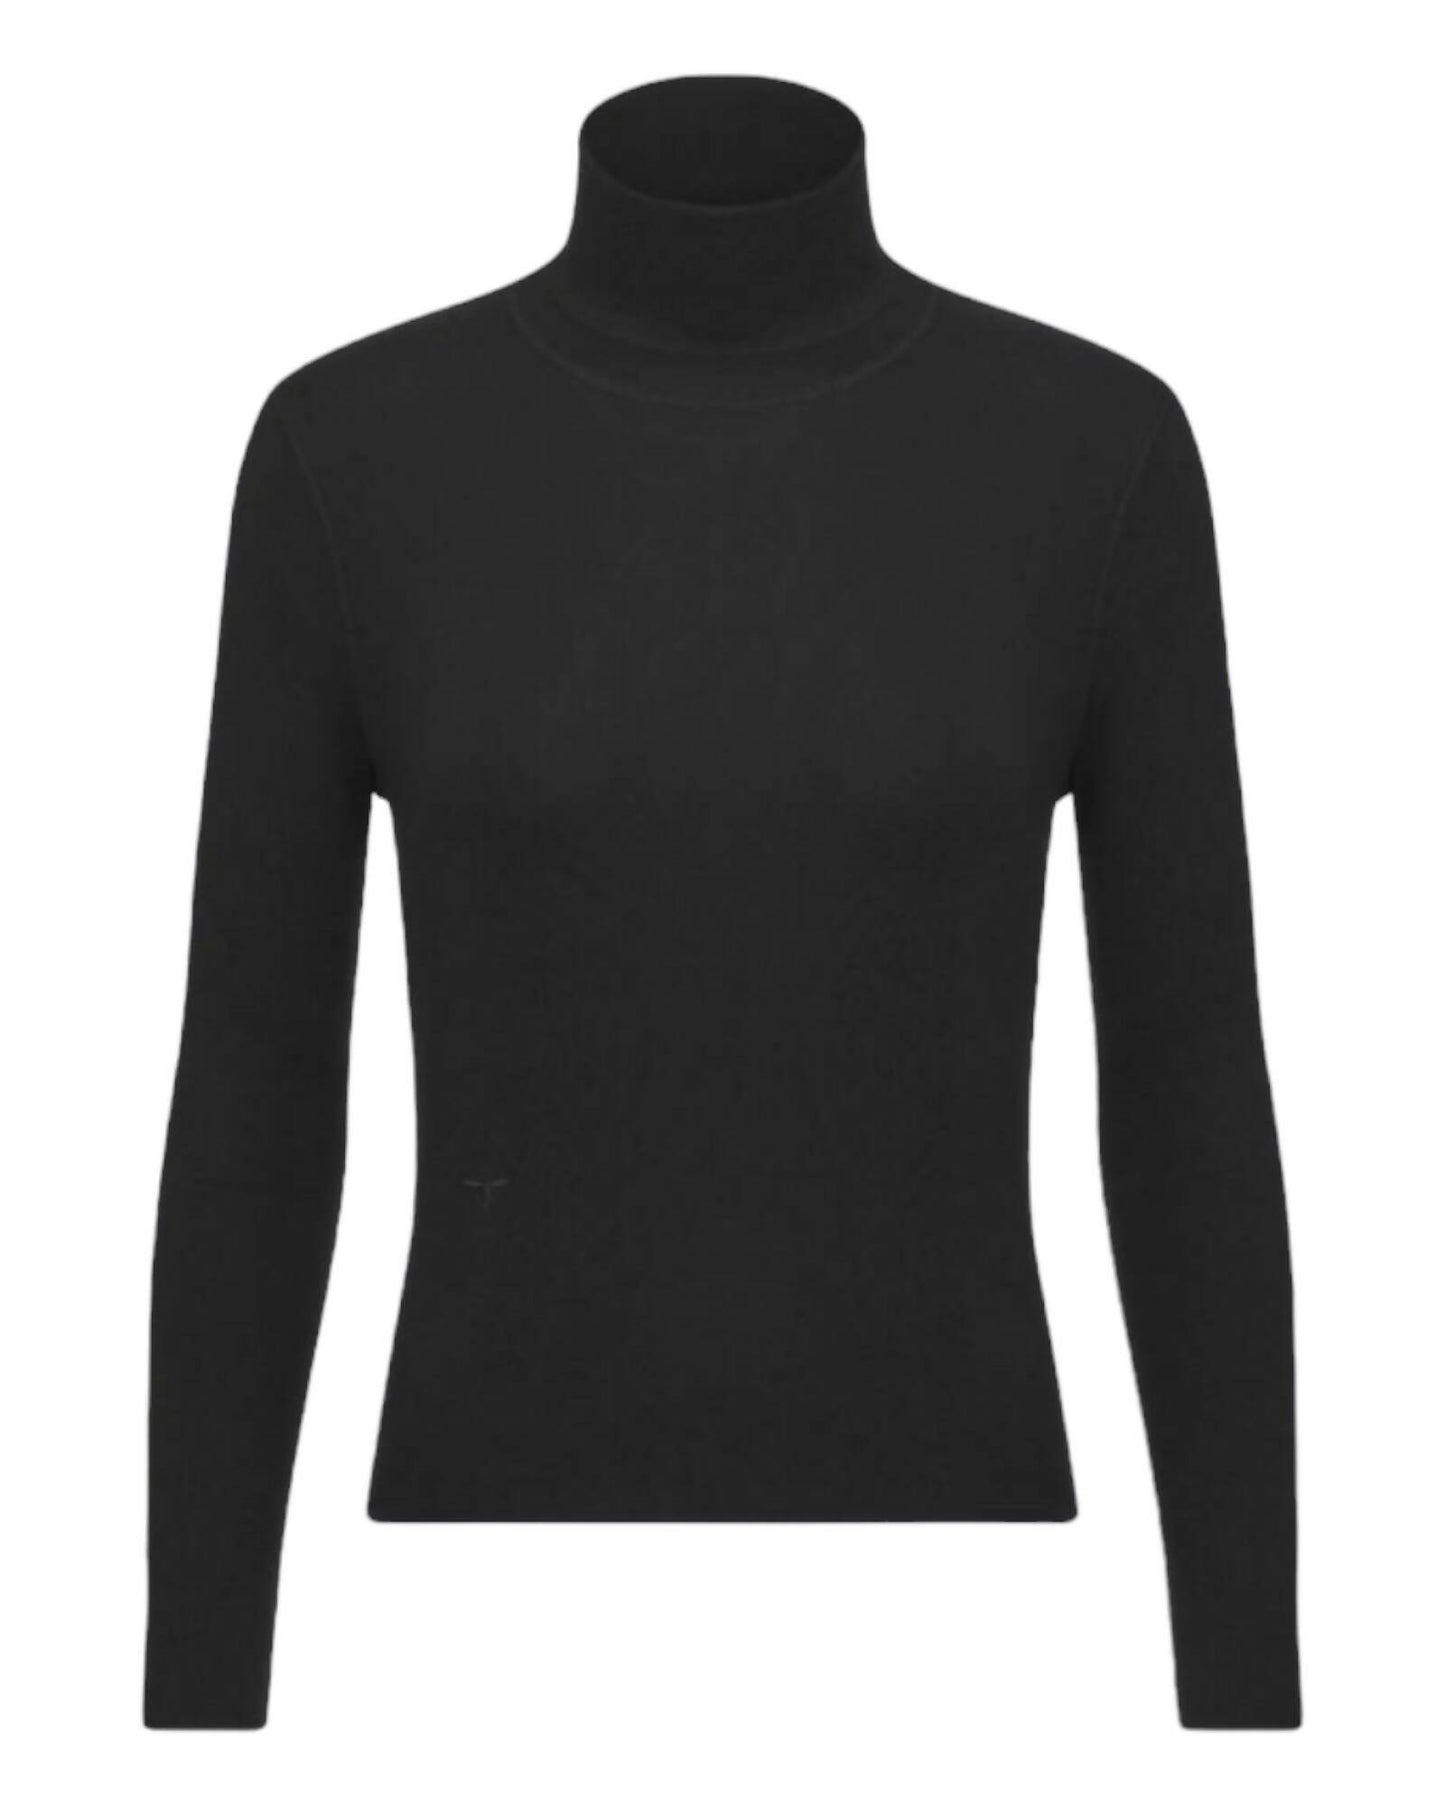 Christian Dior, Cashmere and Silk Ribbed Knit Turtleneck Sweater